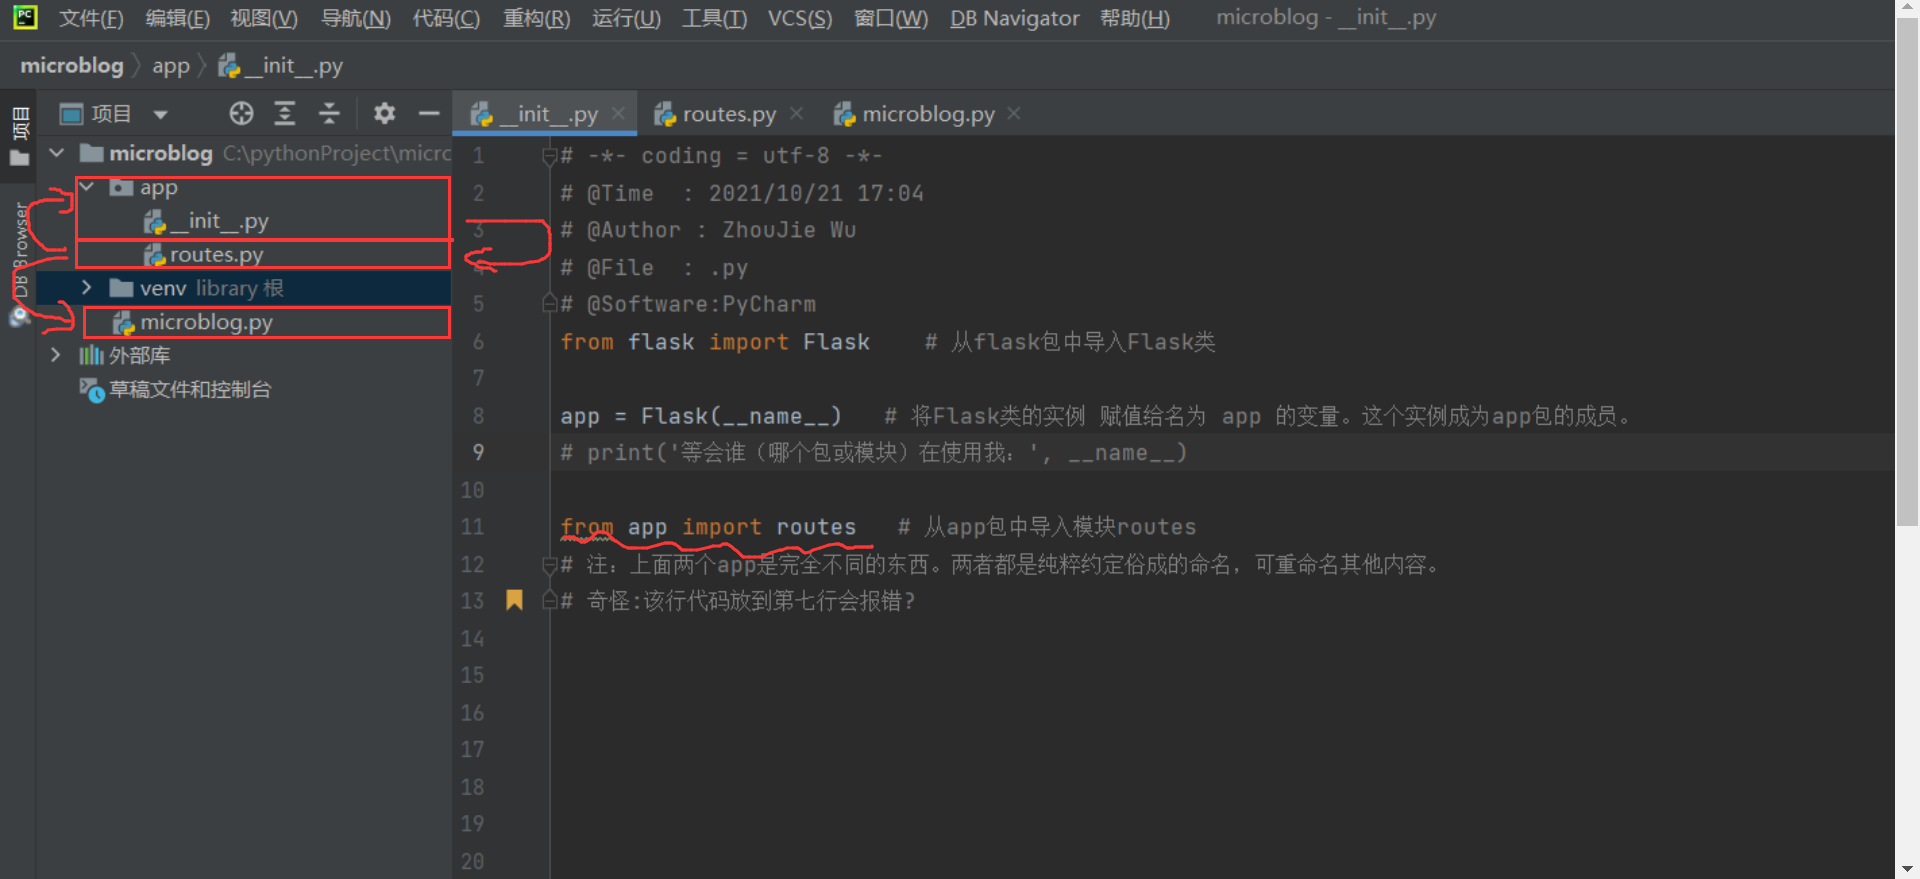 Python错误：ImportError: cannot import name ‘app‘ from partially initialized module ‘app‘ ------循环引用